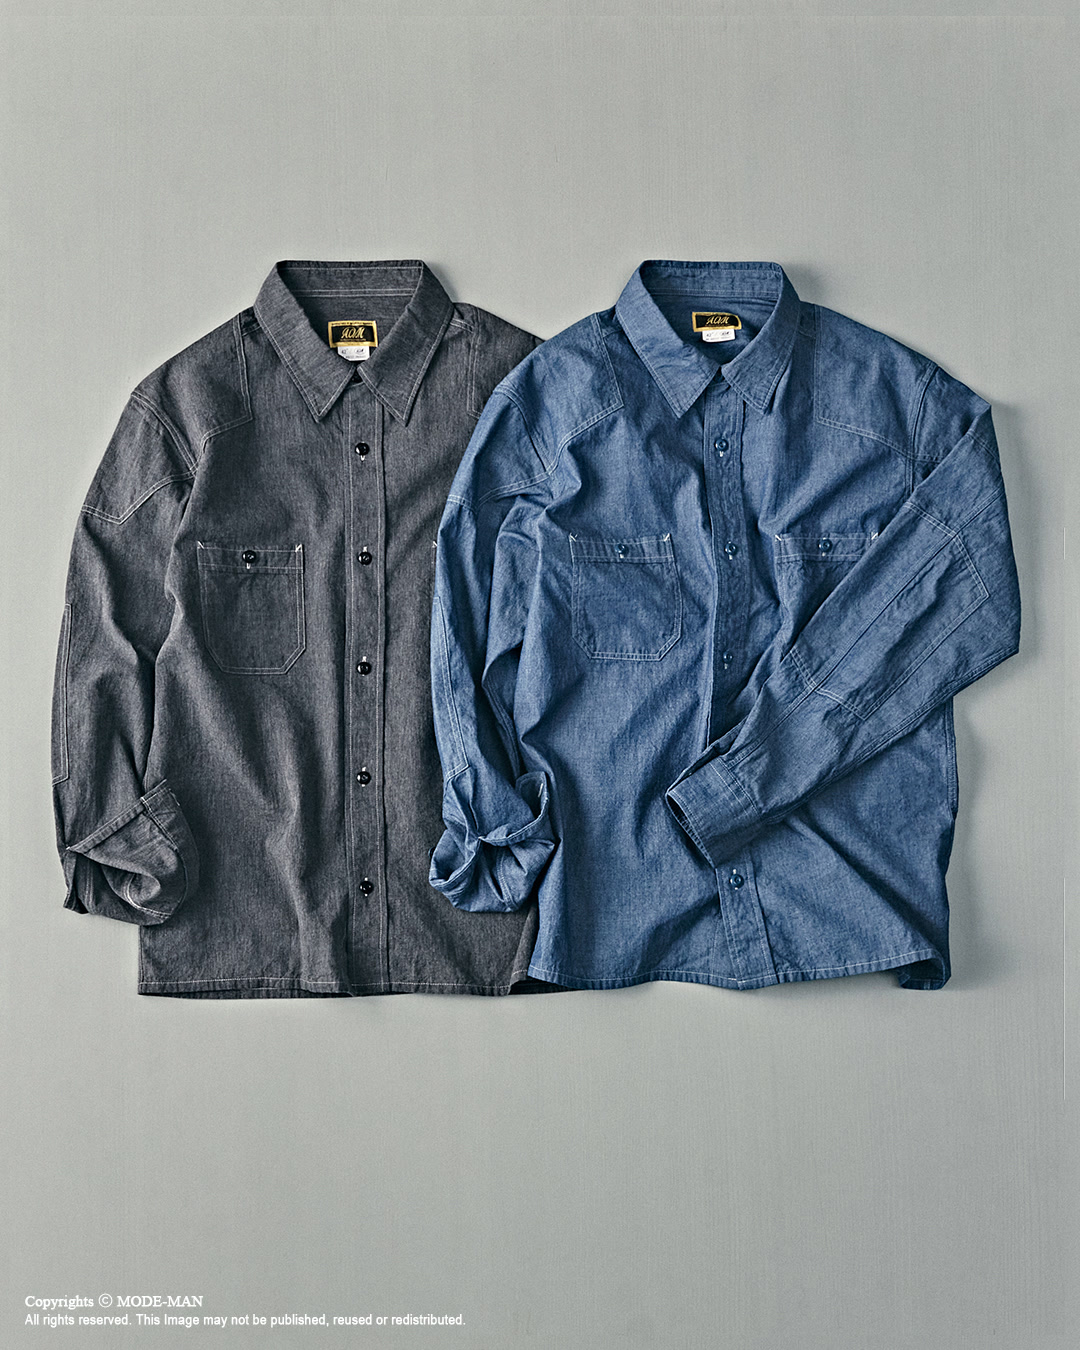 [ADDICT CLOTHES] ORIGINAL PADDED CHAMBRAY SHIRT FOR BIKERS